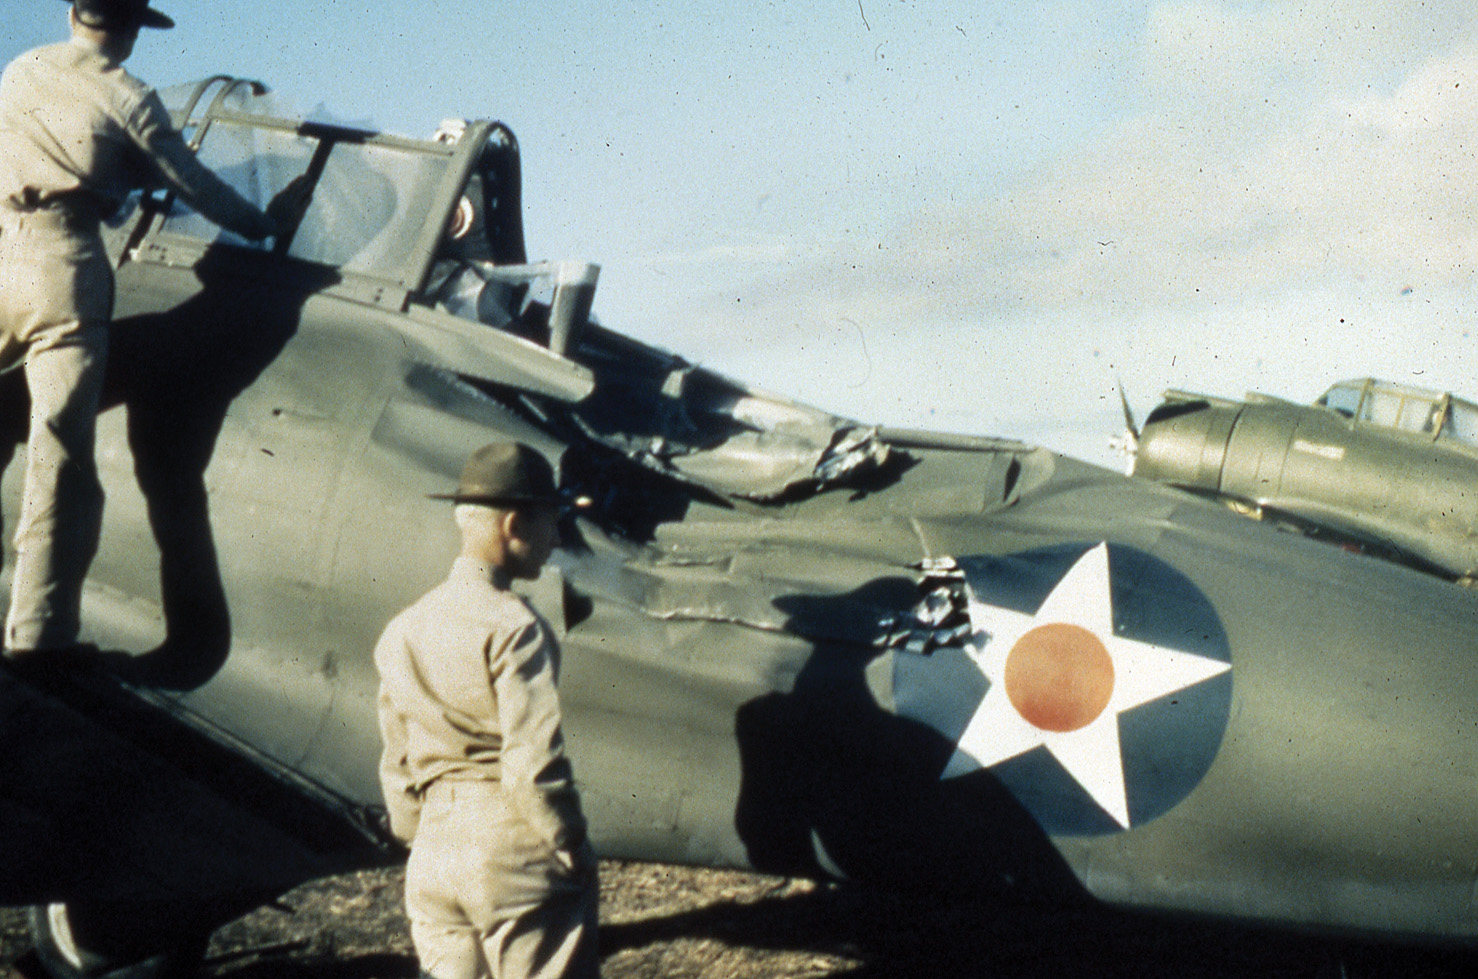 This fighter plane of the U.S. Far East Air Force was damaged during an accident on the ground. Spare parts and repair facilities were at a premium in order to keep American planes flying.